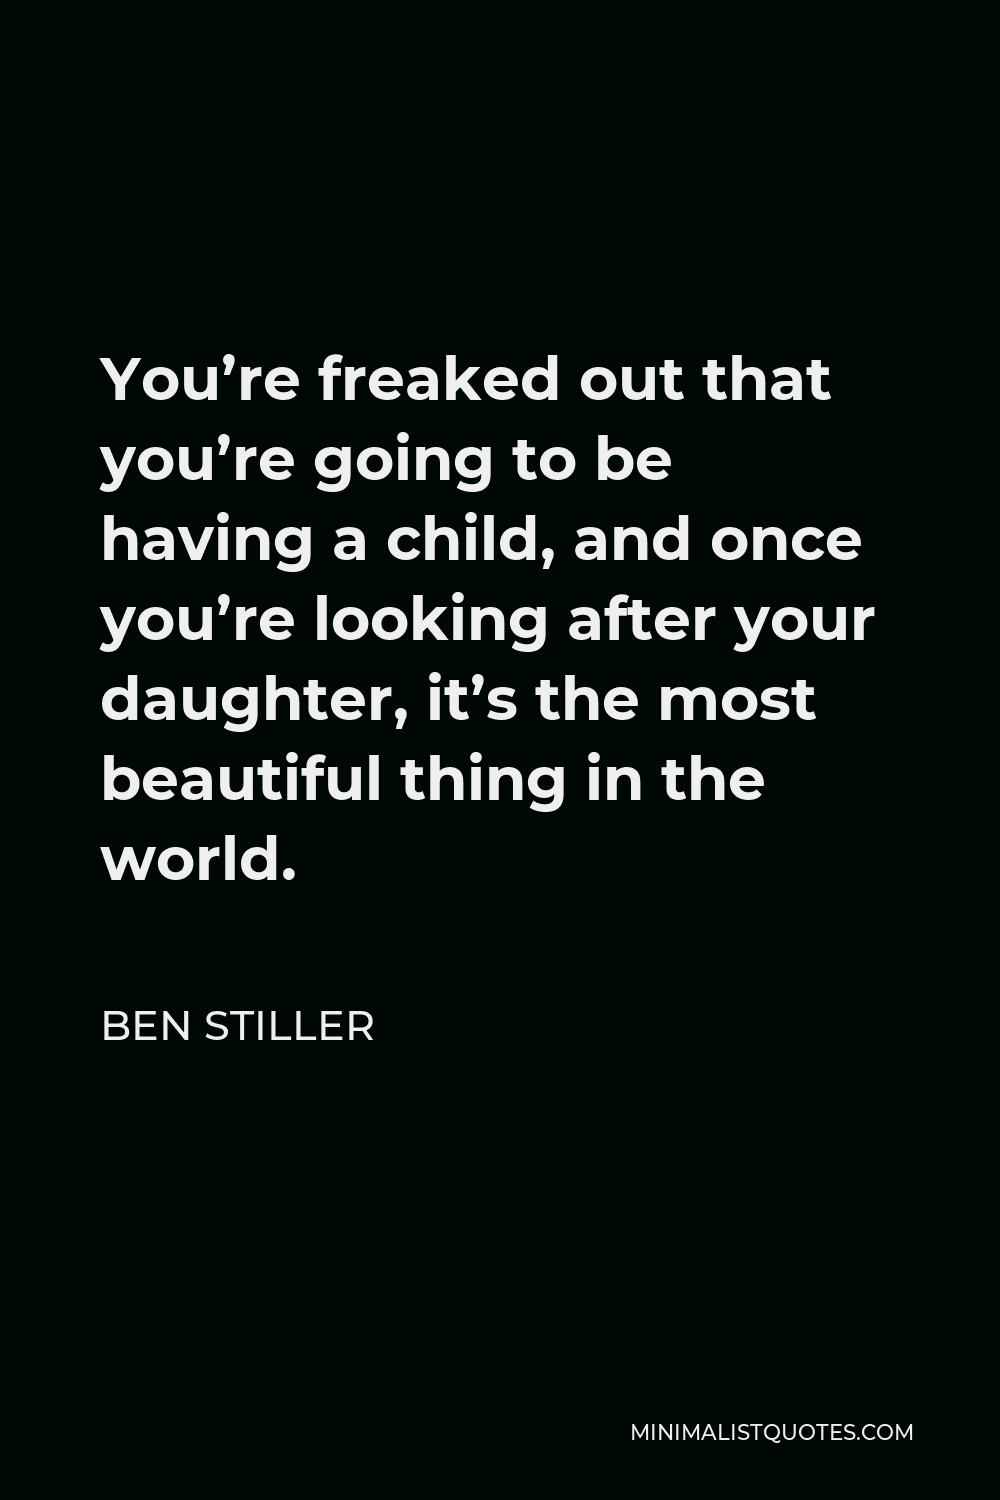 Ben Stiller Quote - You’re freaked out that you’re going to be having a child, and once you’re looking after your daughter, it’s the most beautiful thing in the world.